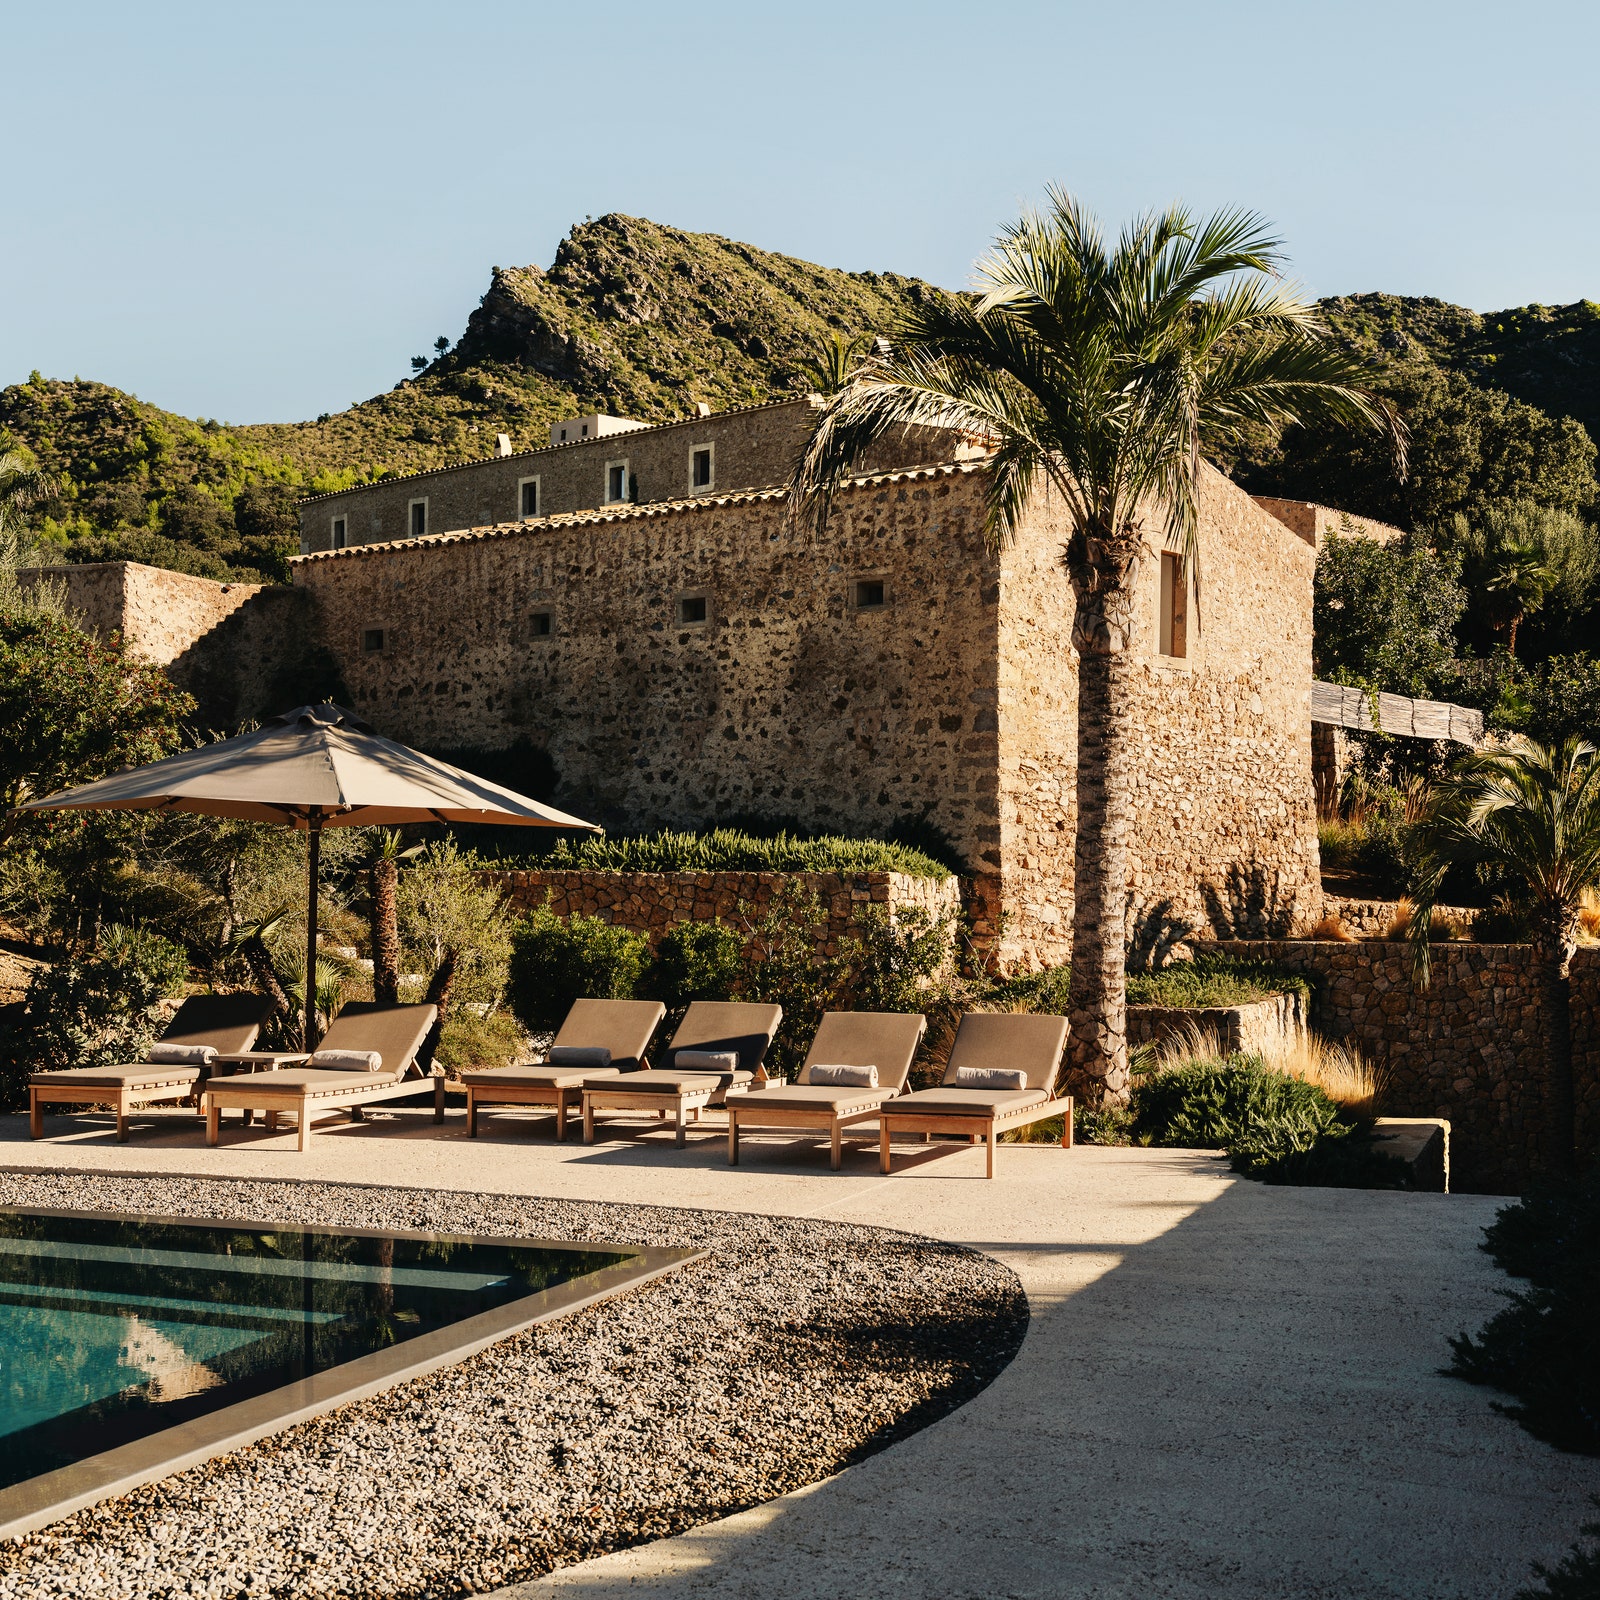 The best hotels in Mallorca, chosen by our editors